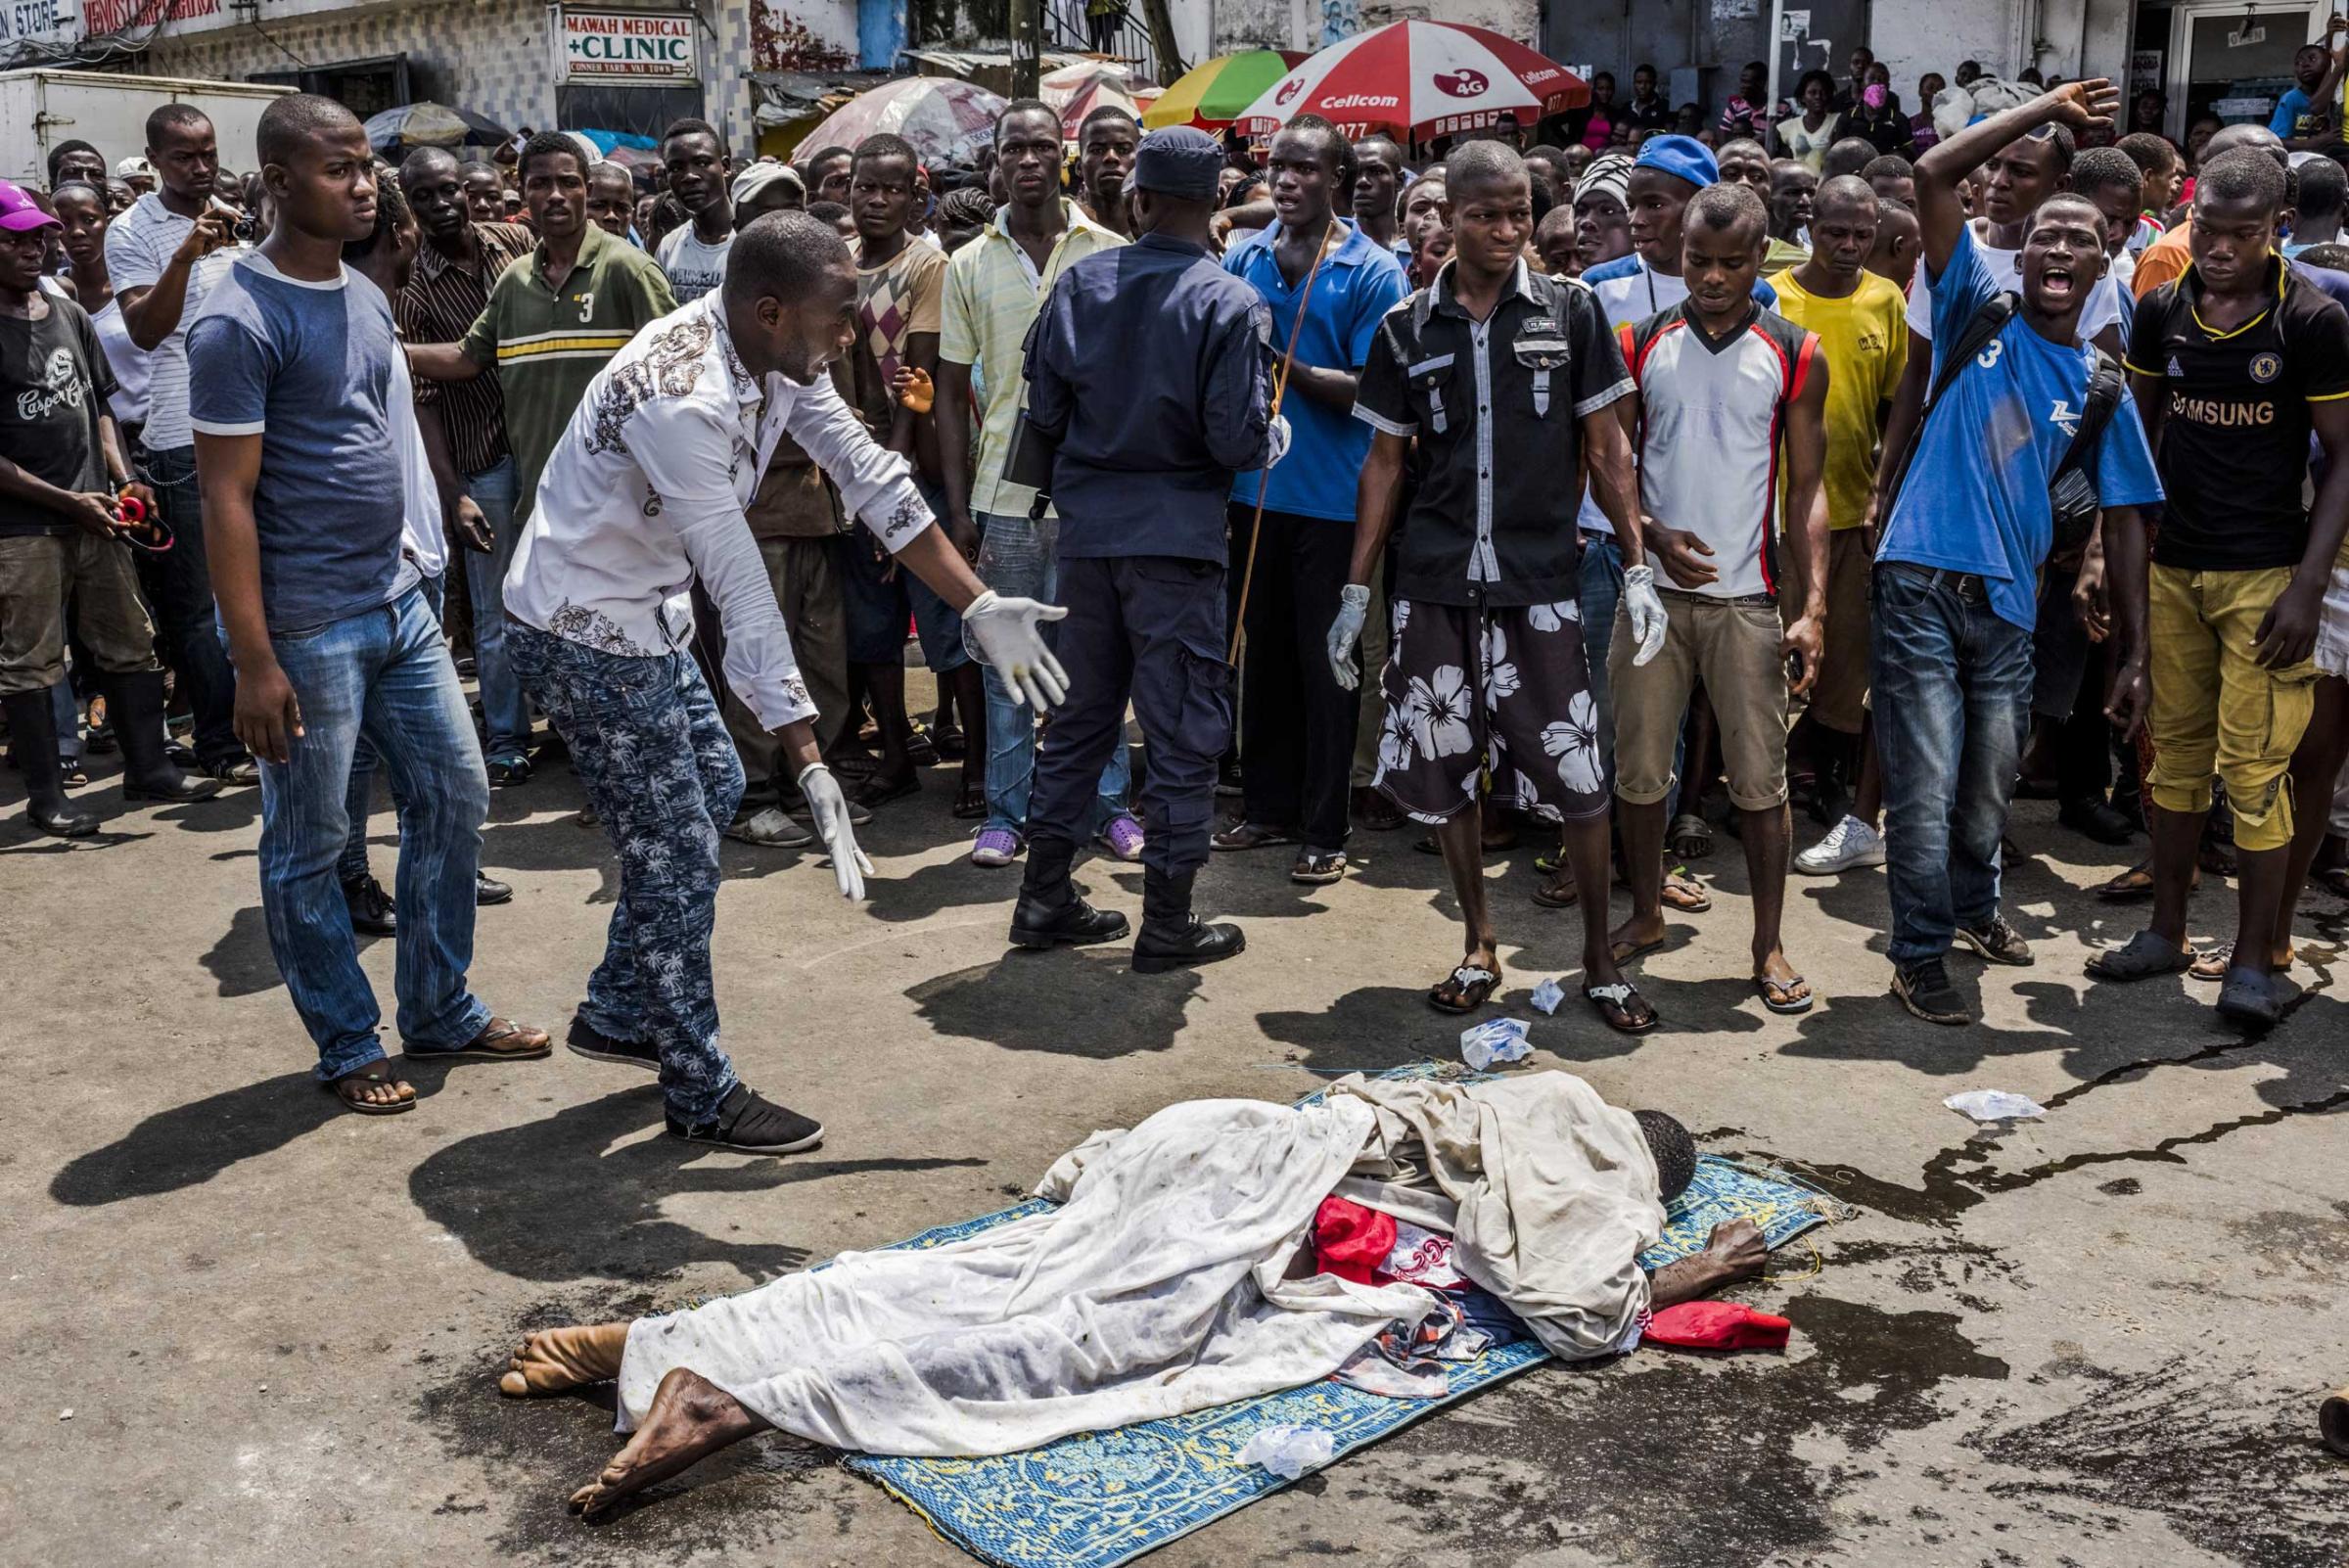 Residents look on as the body of a man suspected of dying from Ebola lies in a busy street, after it was reportedly dragged there to draw attention to burial teams following days of failed attempts by his family to have his body picked up, in Monrovia, Li